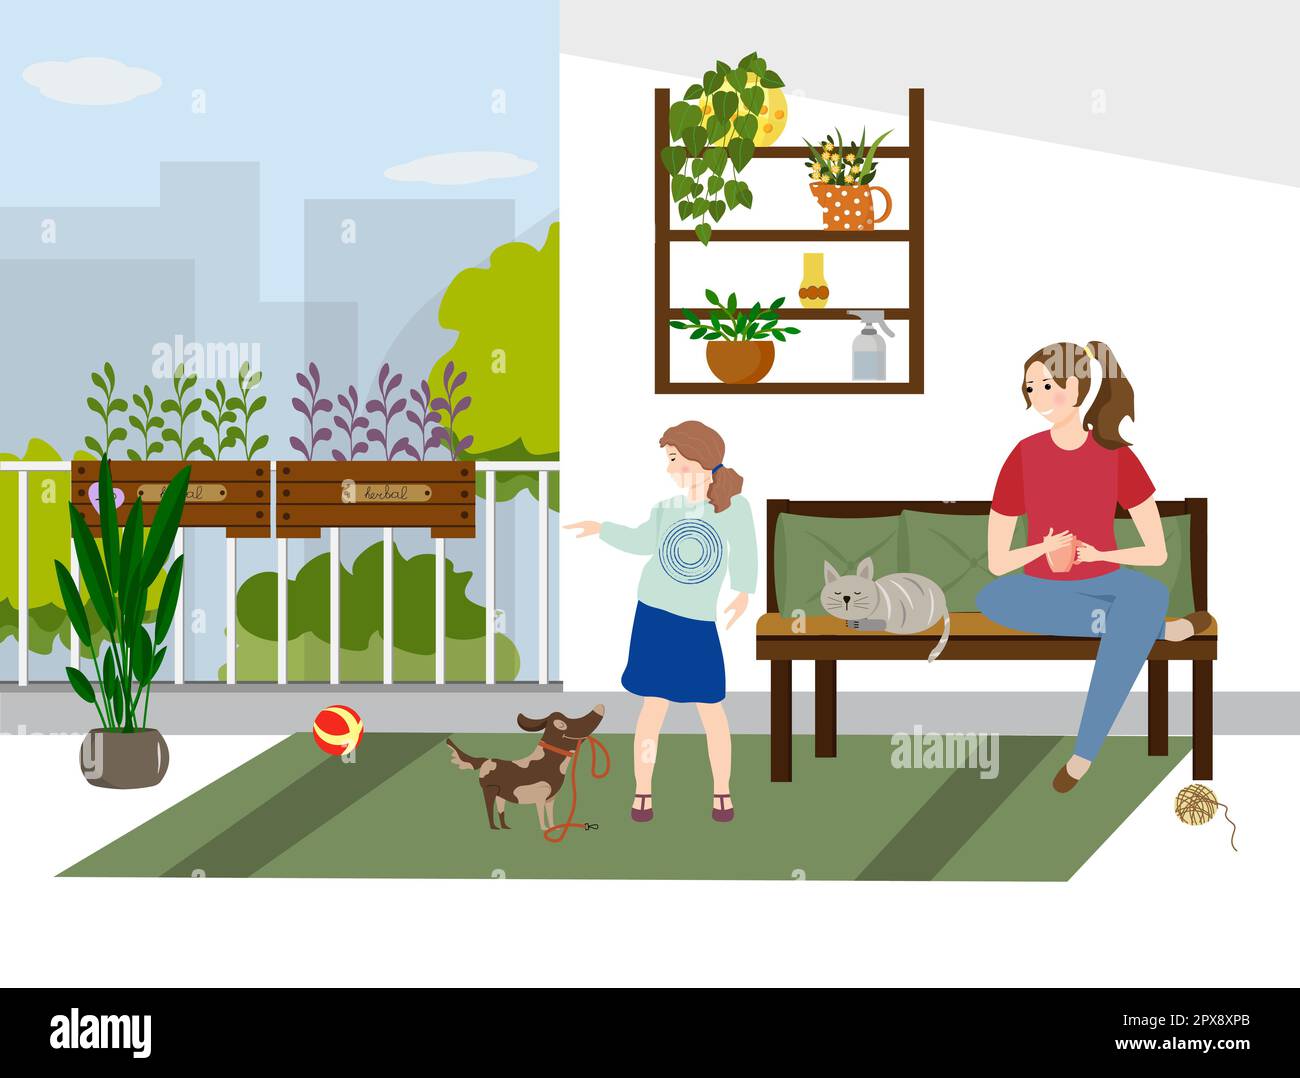 The family is relaxing on the balcony. The girl is playing with the dog, the cat is resting on the couch.  Stock Vector